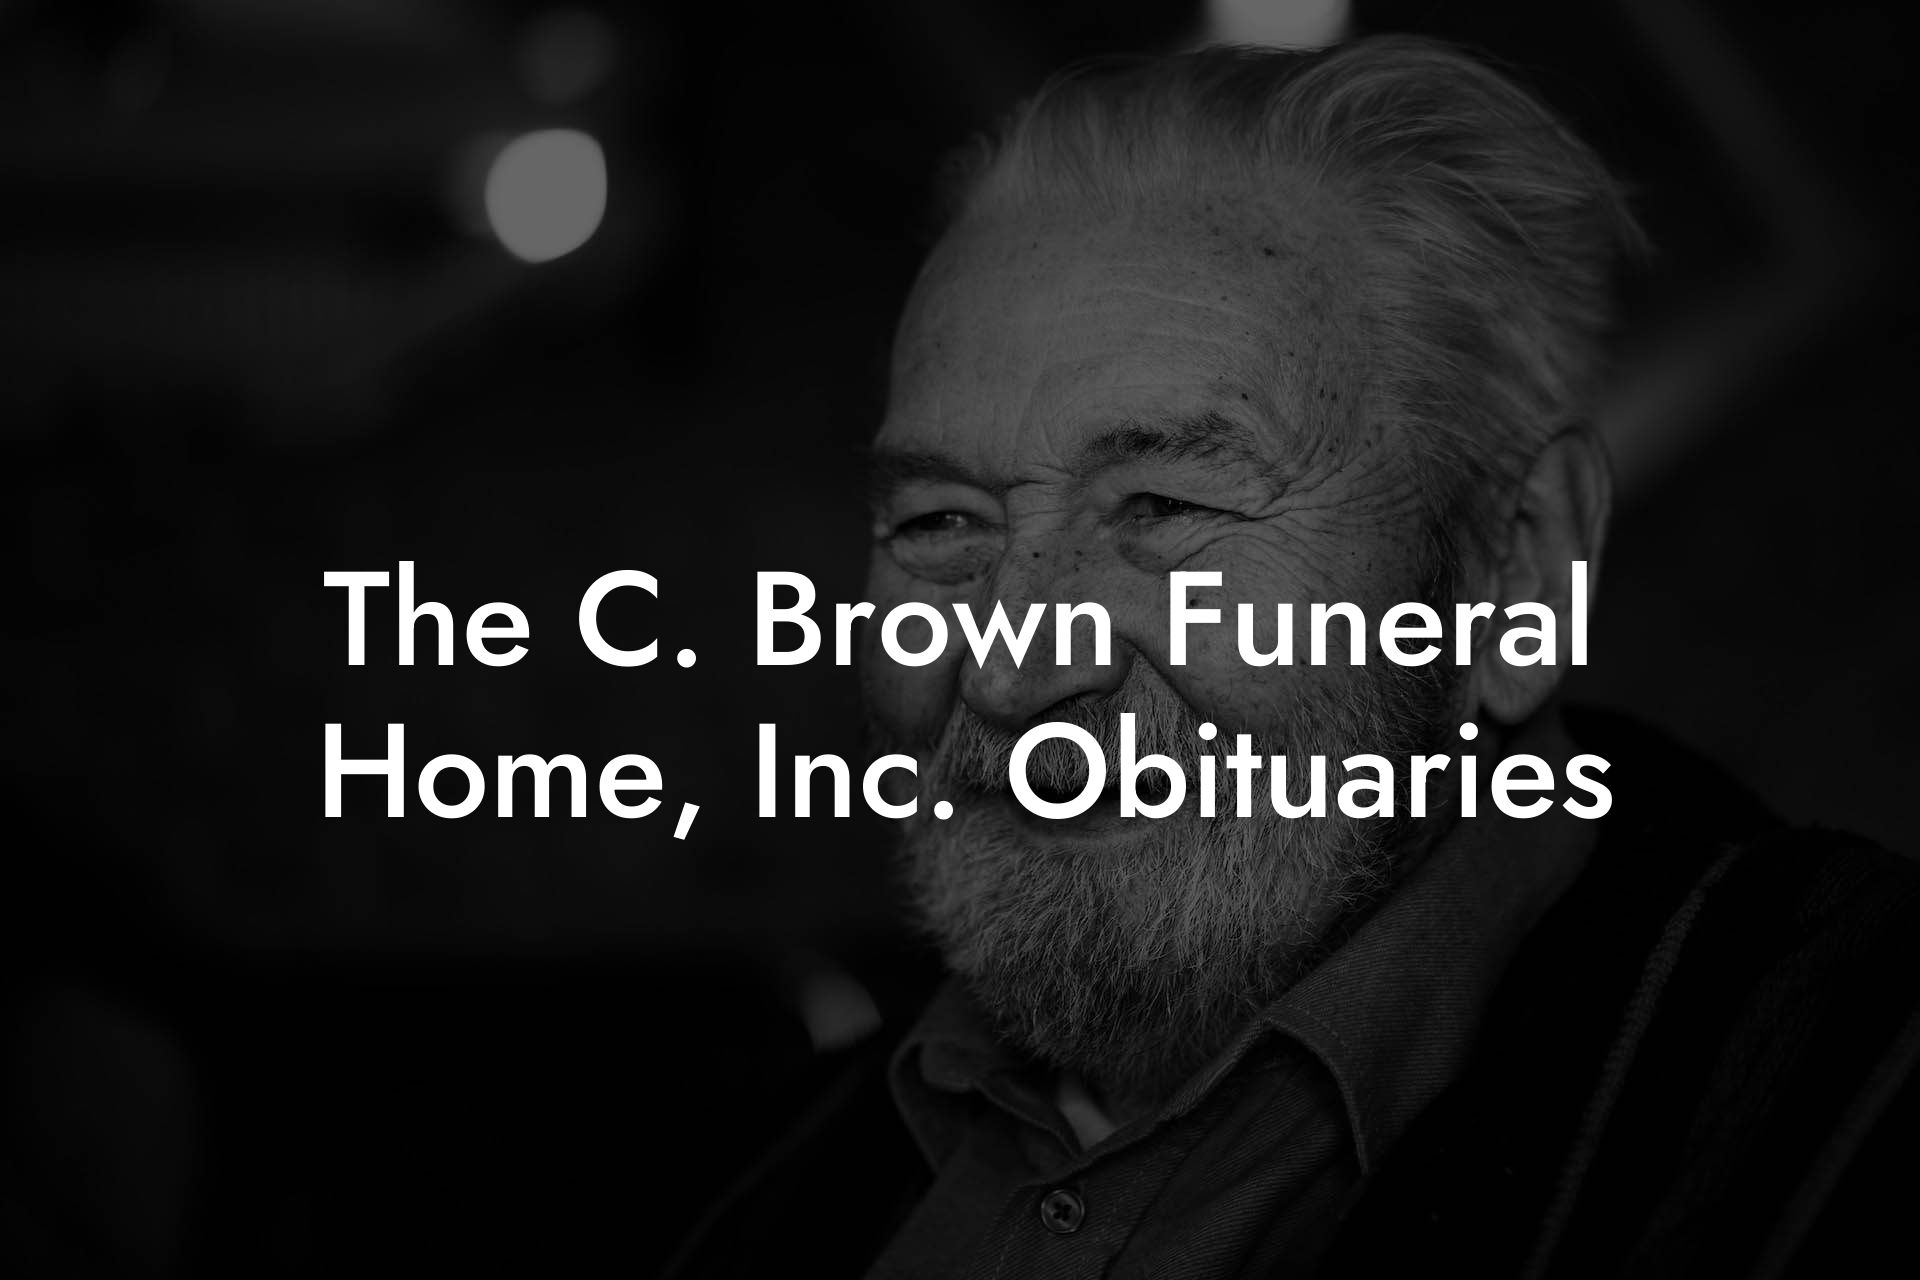 The C. Brown Funeral Home, Inc. Obituaries